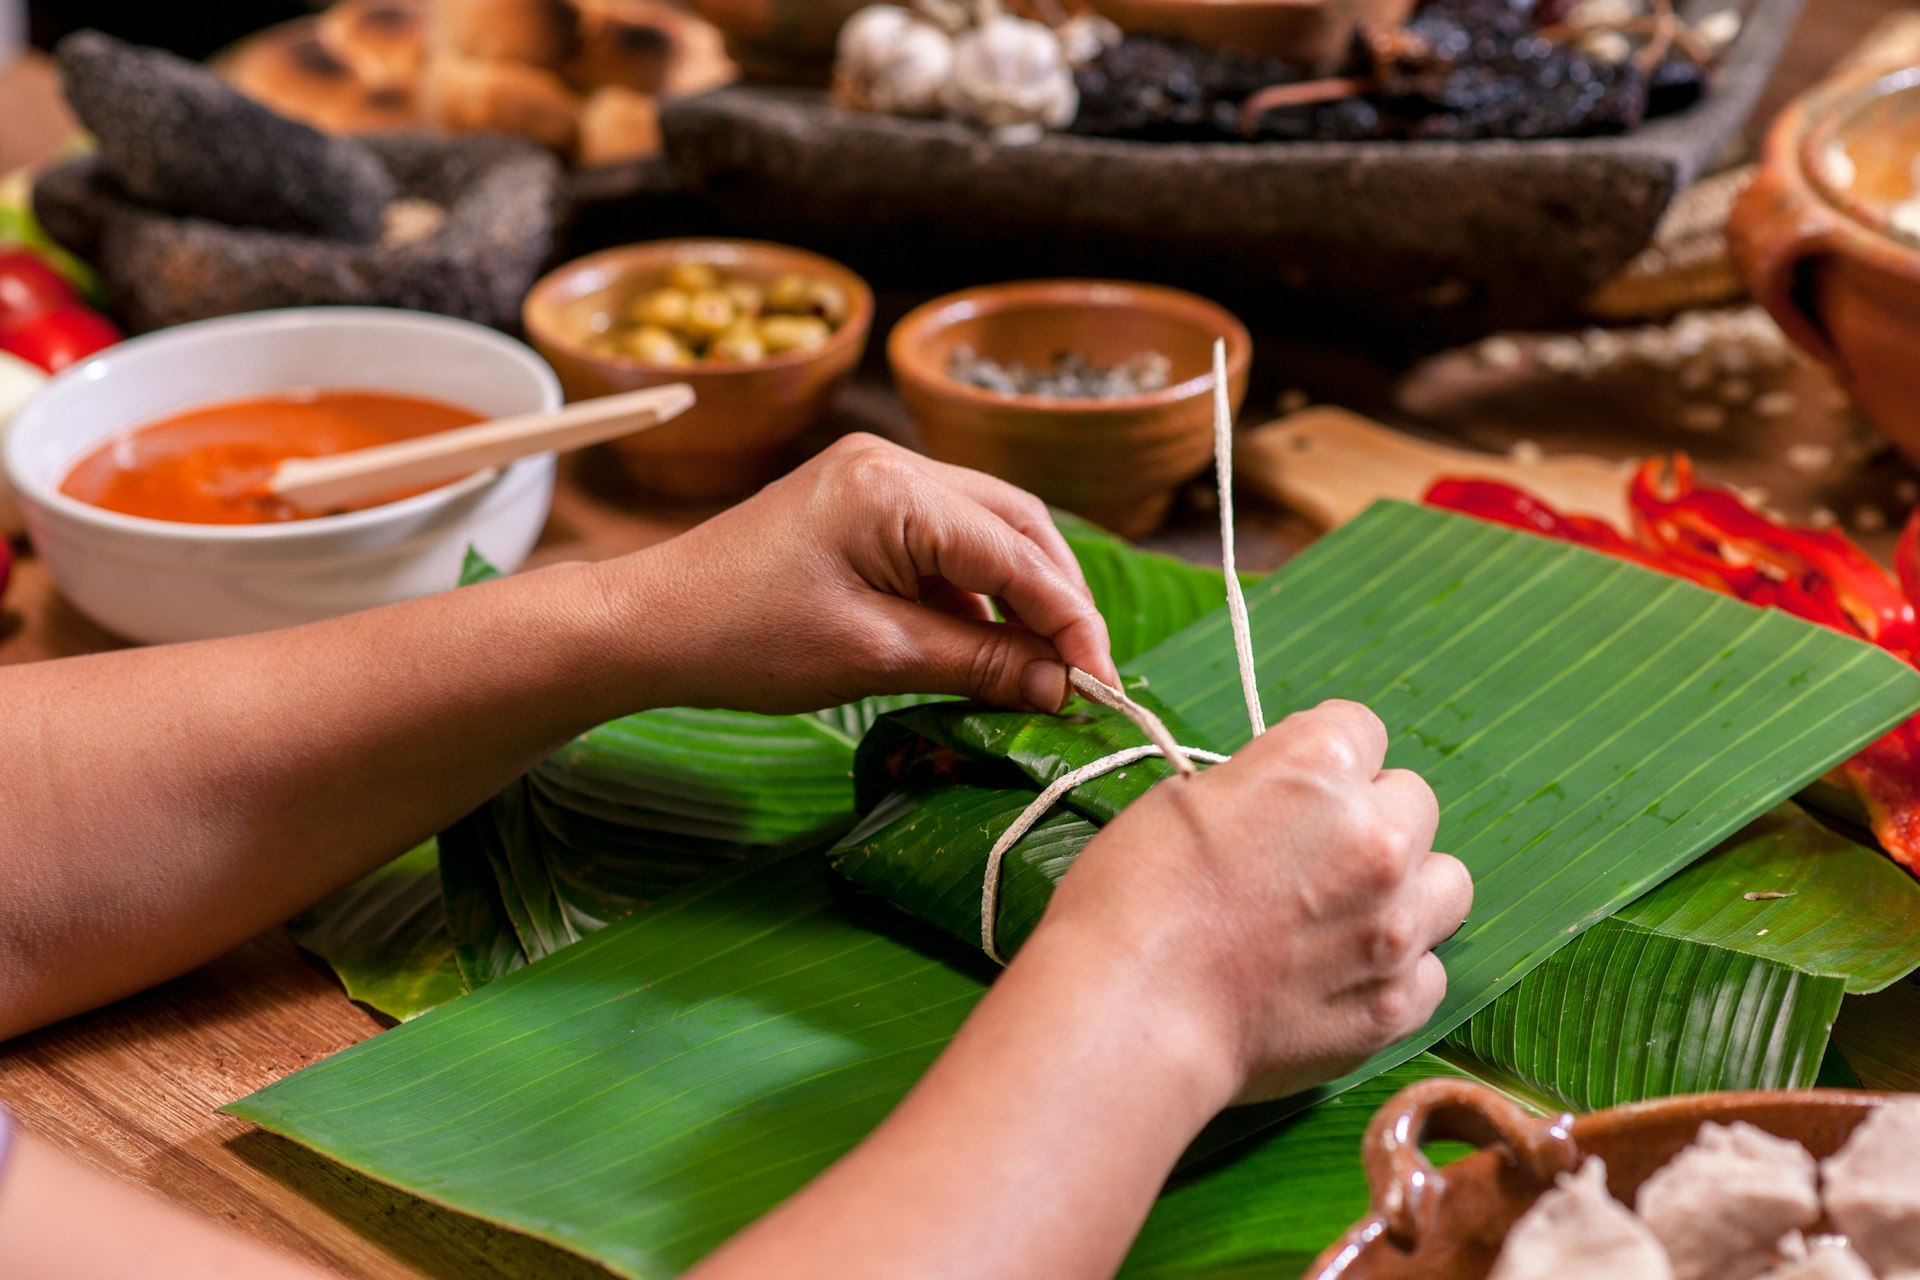 woman's hand tying and wrapping traditional Guatemalan tamales with banana leaves on a rustic wooden table with ingredients and spices at the workplace